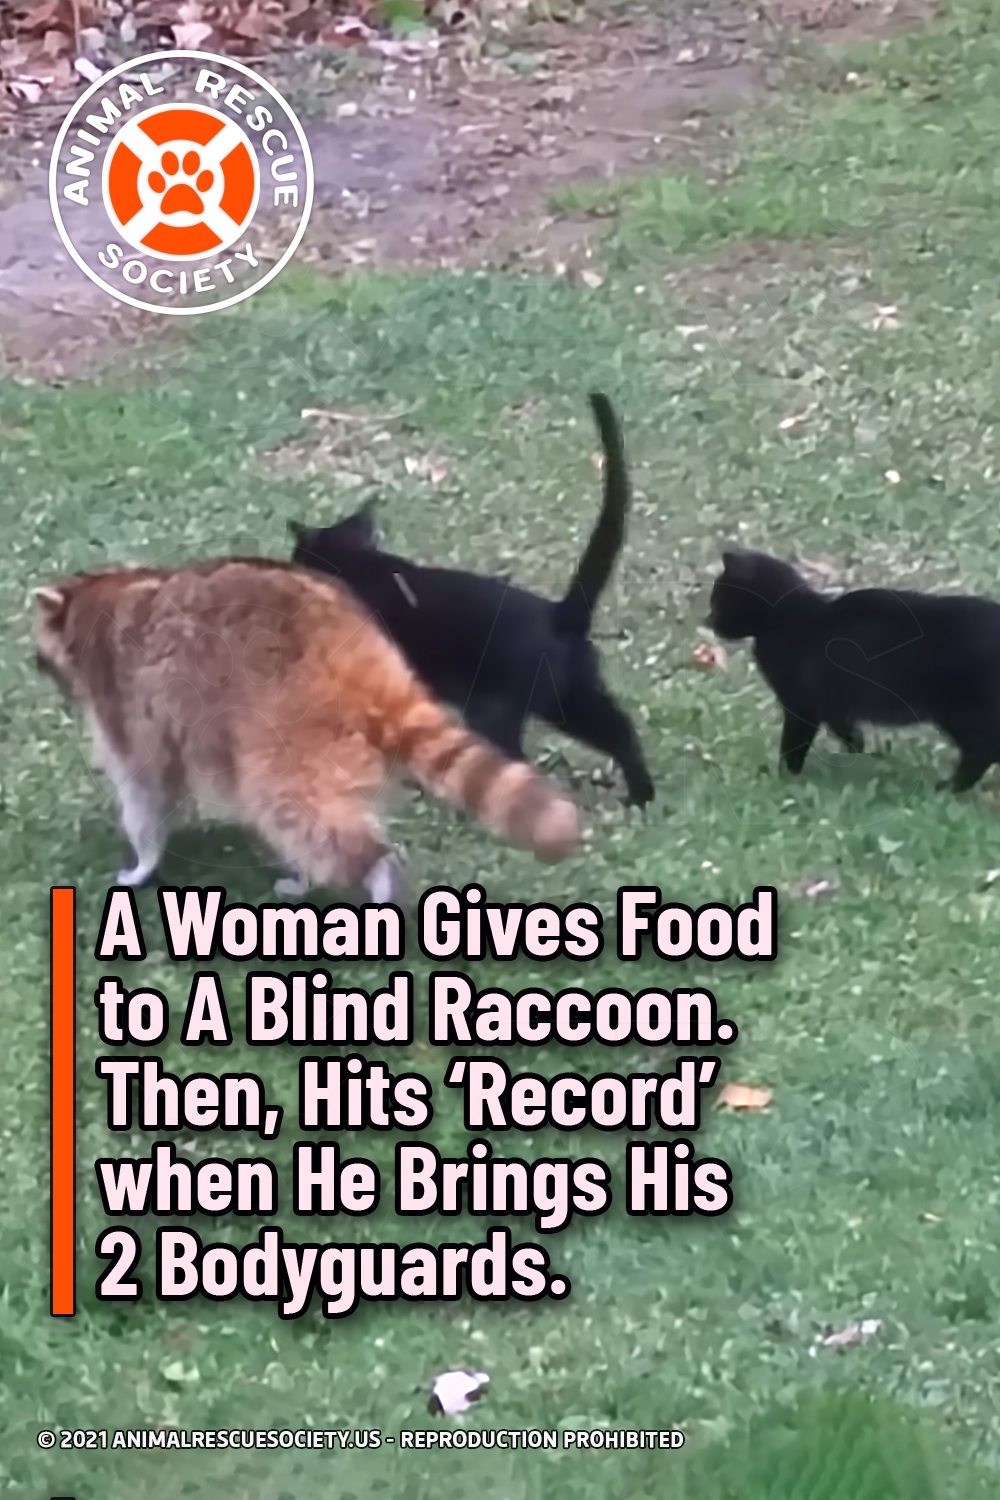 A Woman Gives Food to A Blind Raccoon. Then, Hits ‘Record’ when He Brings His 2 Bodyguards.